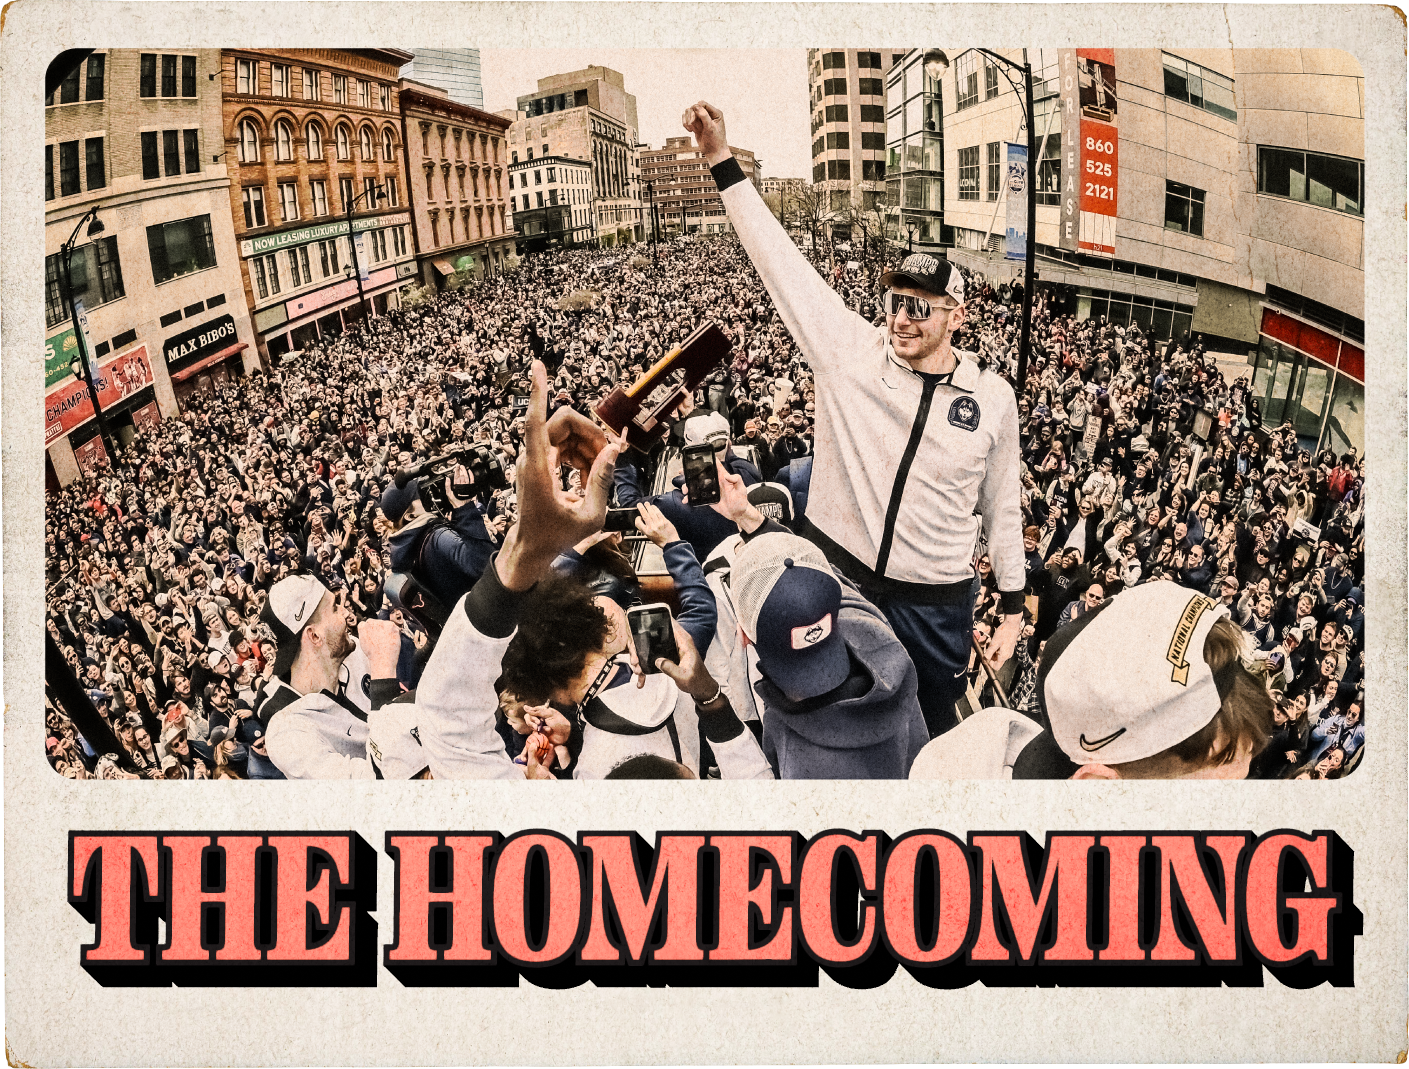 Vintage-style trading card with the words “The Homecoming” on the bottom and an image of a crowd of people filling the streets of downtown Hartford behind a group of UConn men’s basketball players holding up their arms and a trophy while standing on top of a double-decker bus during their 2024 victory parade.